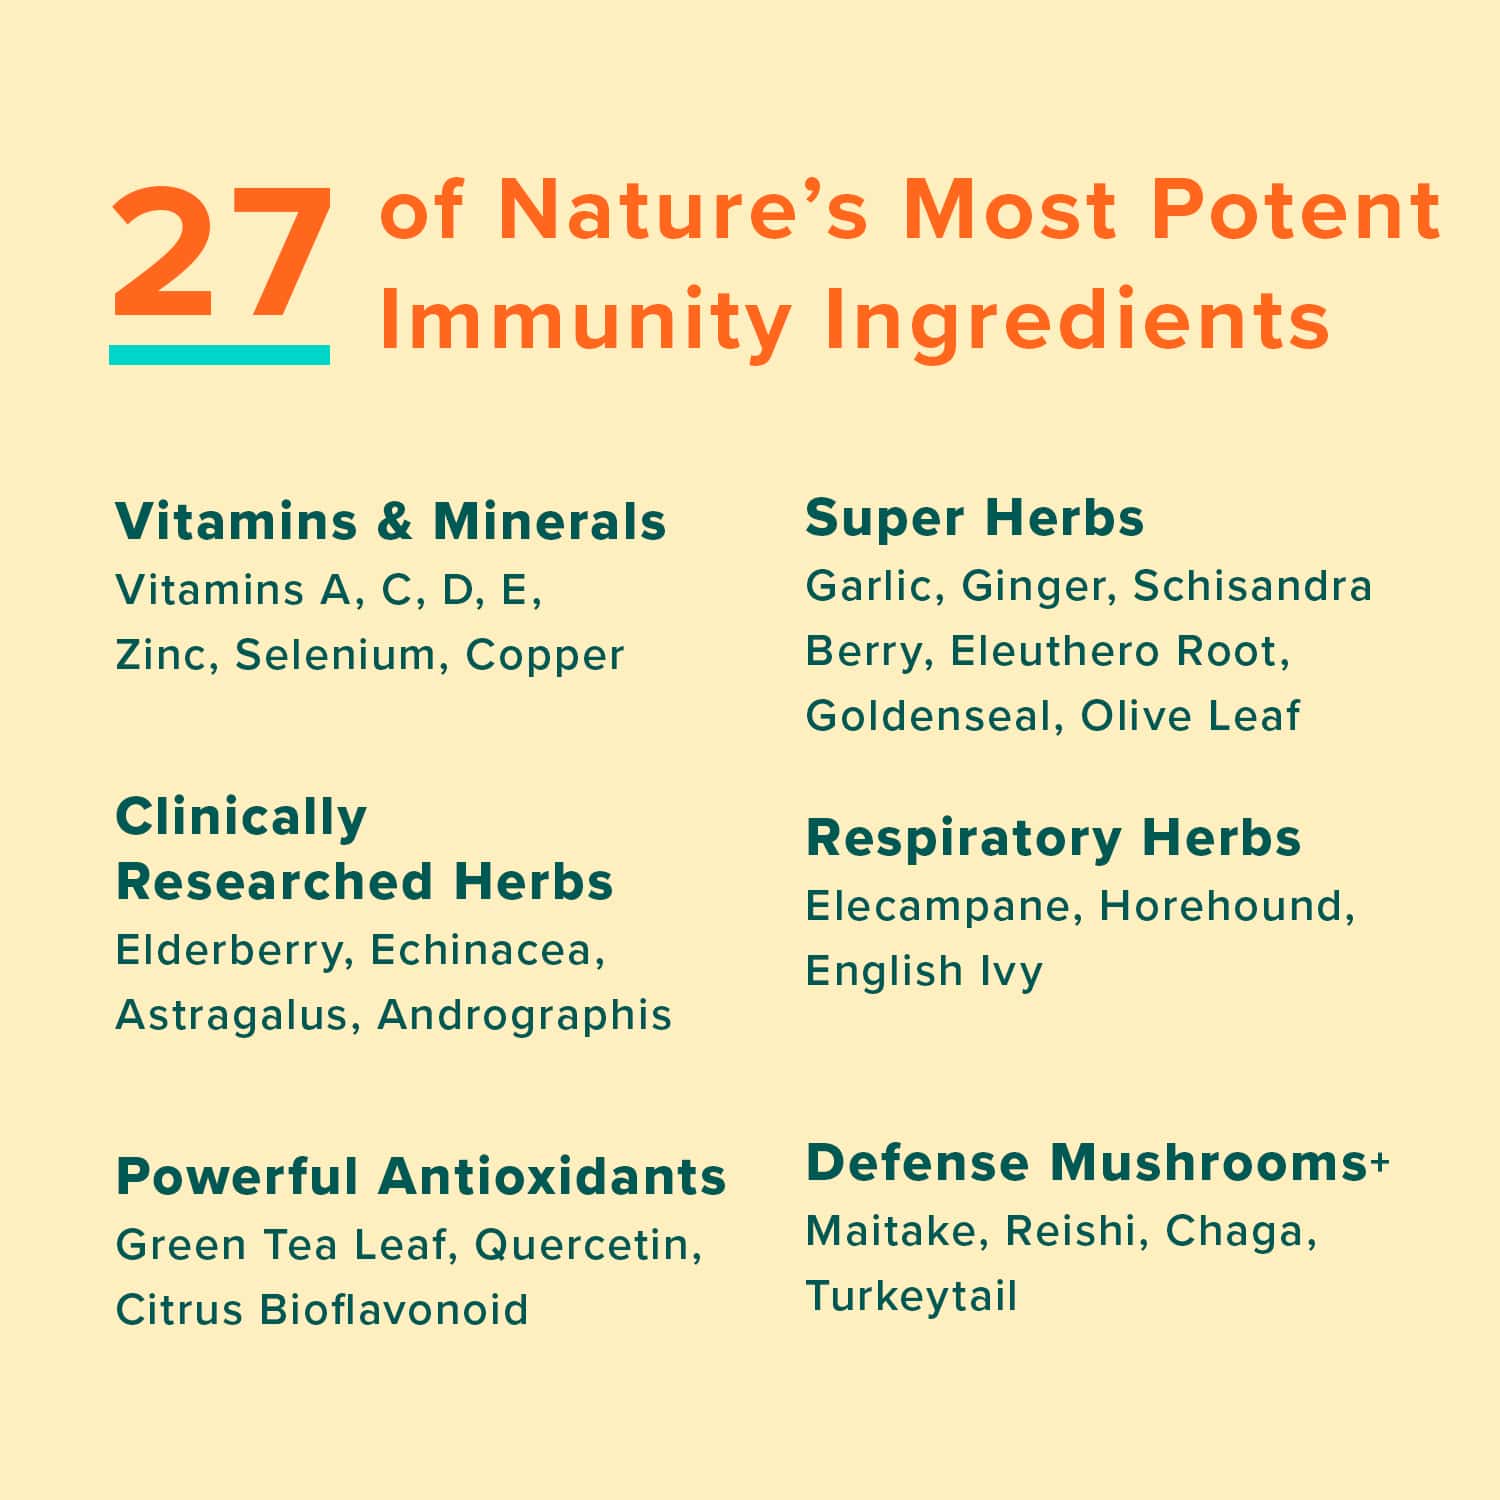 27 of Nature's Most Potent Immunity Ingredients